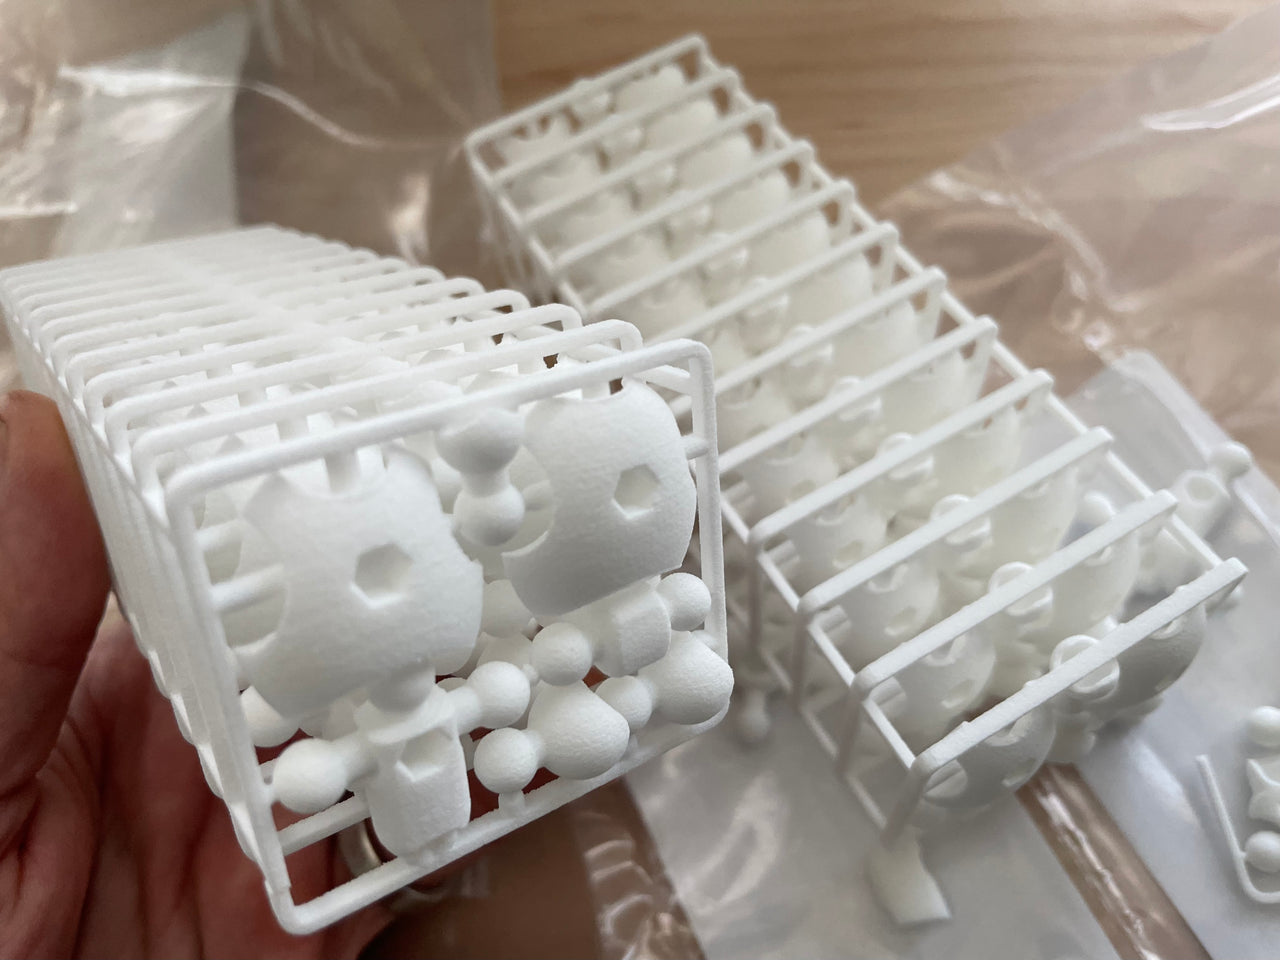 Behind the scenes: Unboxing 3d printed product sets for restock